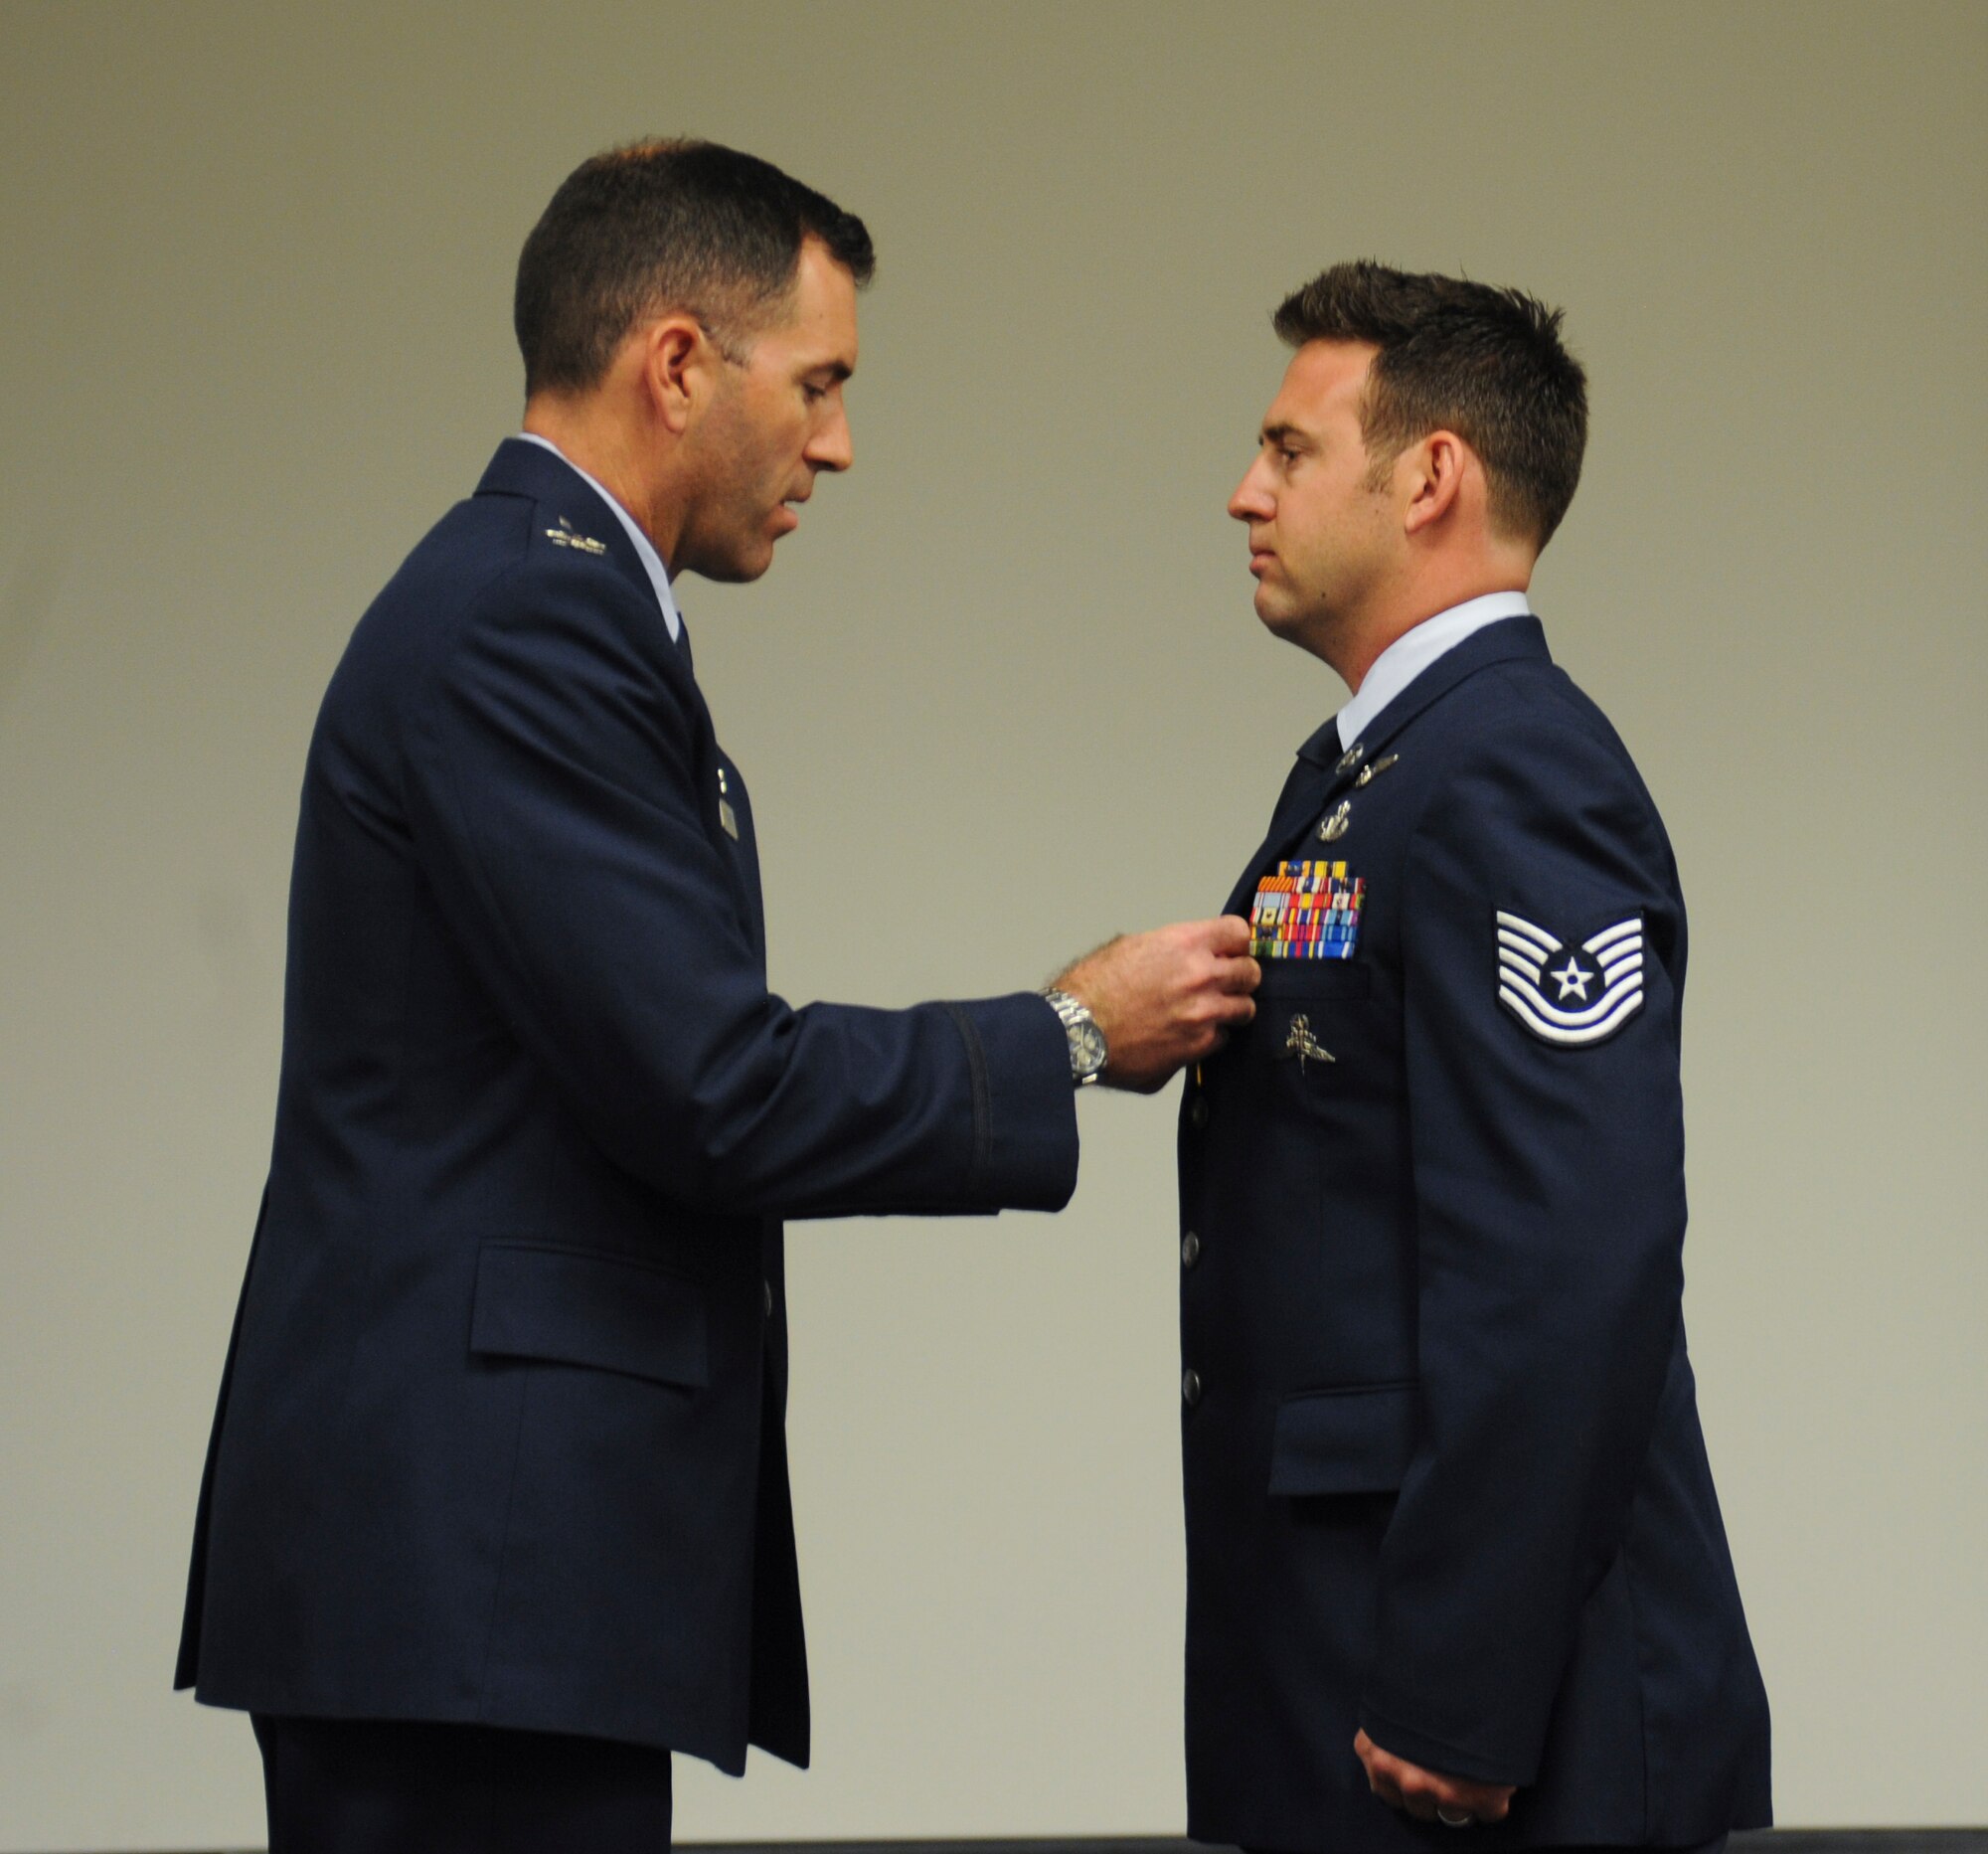 U.S. Air Force Tech. Sgt. Brandon Daugherty, 306th Rescue Squadron pararescueman, receives a Bronze Star Medal with valor from Col. Sean Choquette, 563rd Rescue Group commander, at Davis-Monthan Air Force Base, Ariz., June 2, 2014. Daugherty distinguished himself by heroism as pararescue team leader for the 46th Expeditionary Rescue Squadron, 651st Air Expeditionary Group, 451st Air Expeditionary Wing while engaged in action against an enemy forces in Afghanistan on  Feb. 21, 2012. (U.S. Air Force photo by Senior Airman Sivan Veazie/Released)